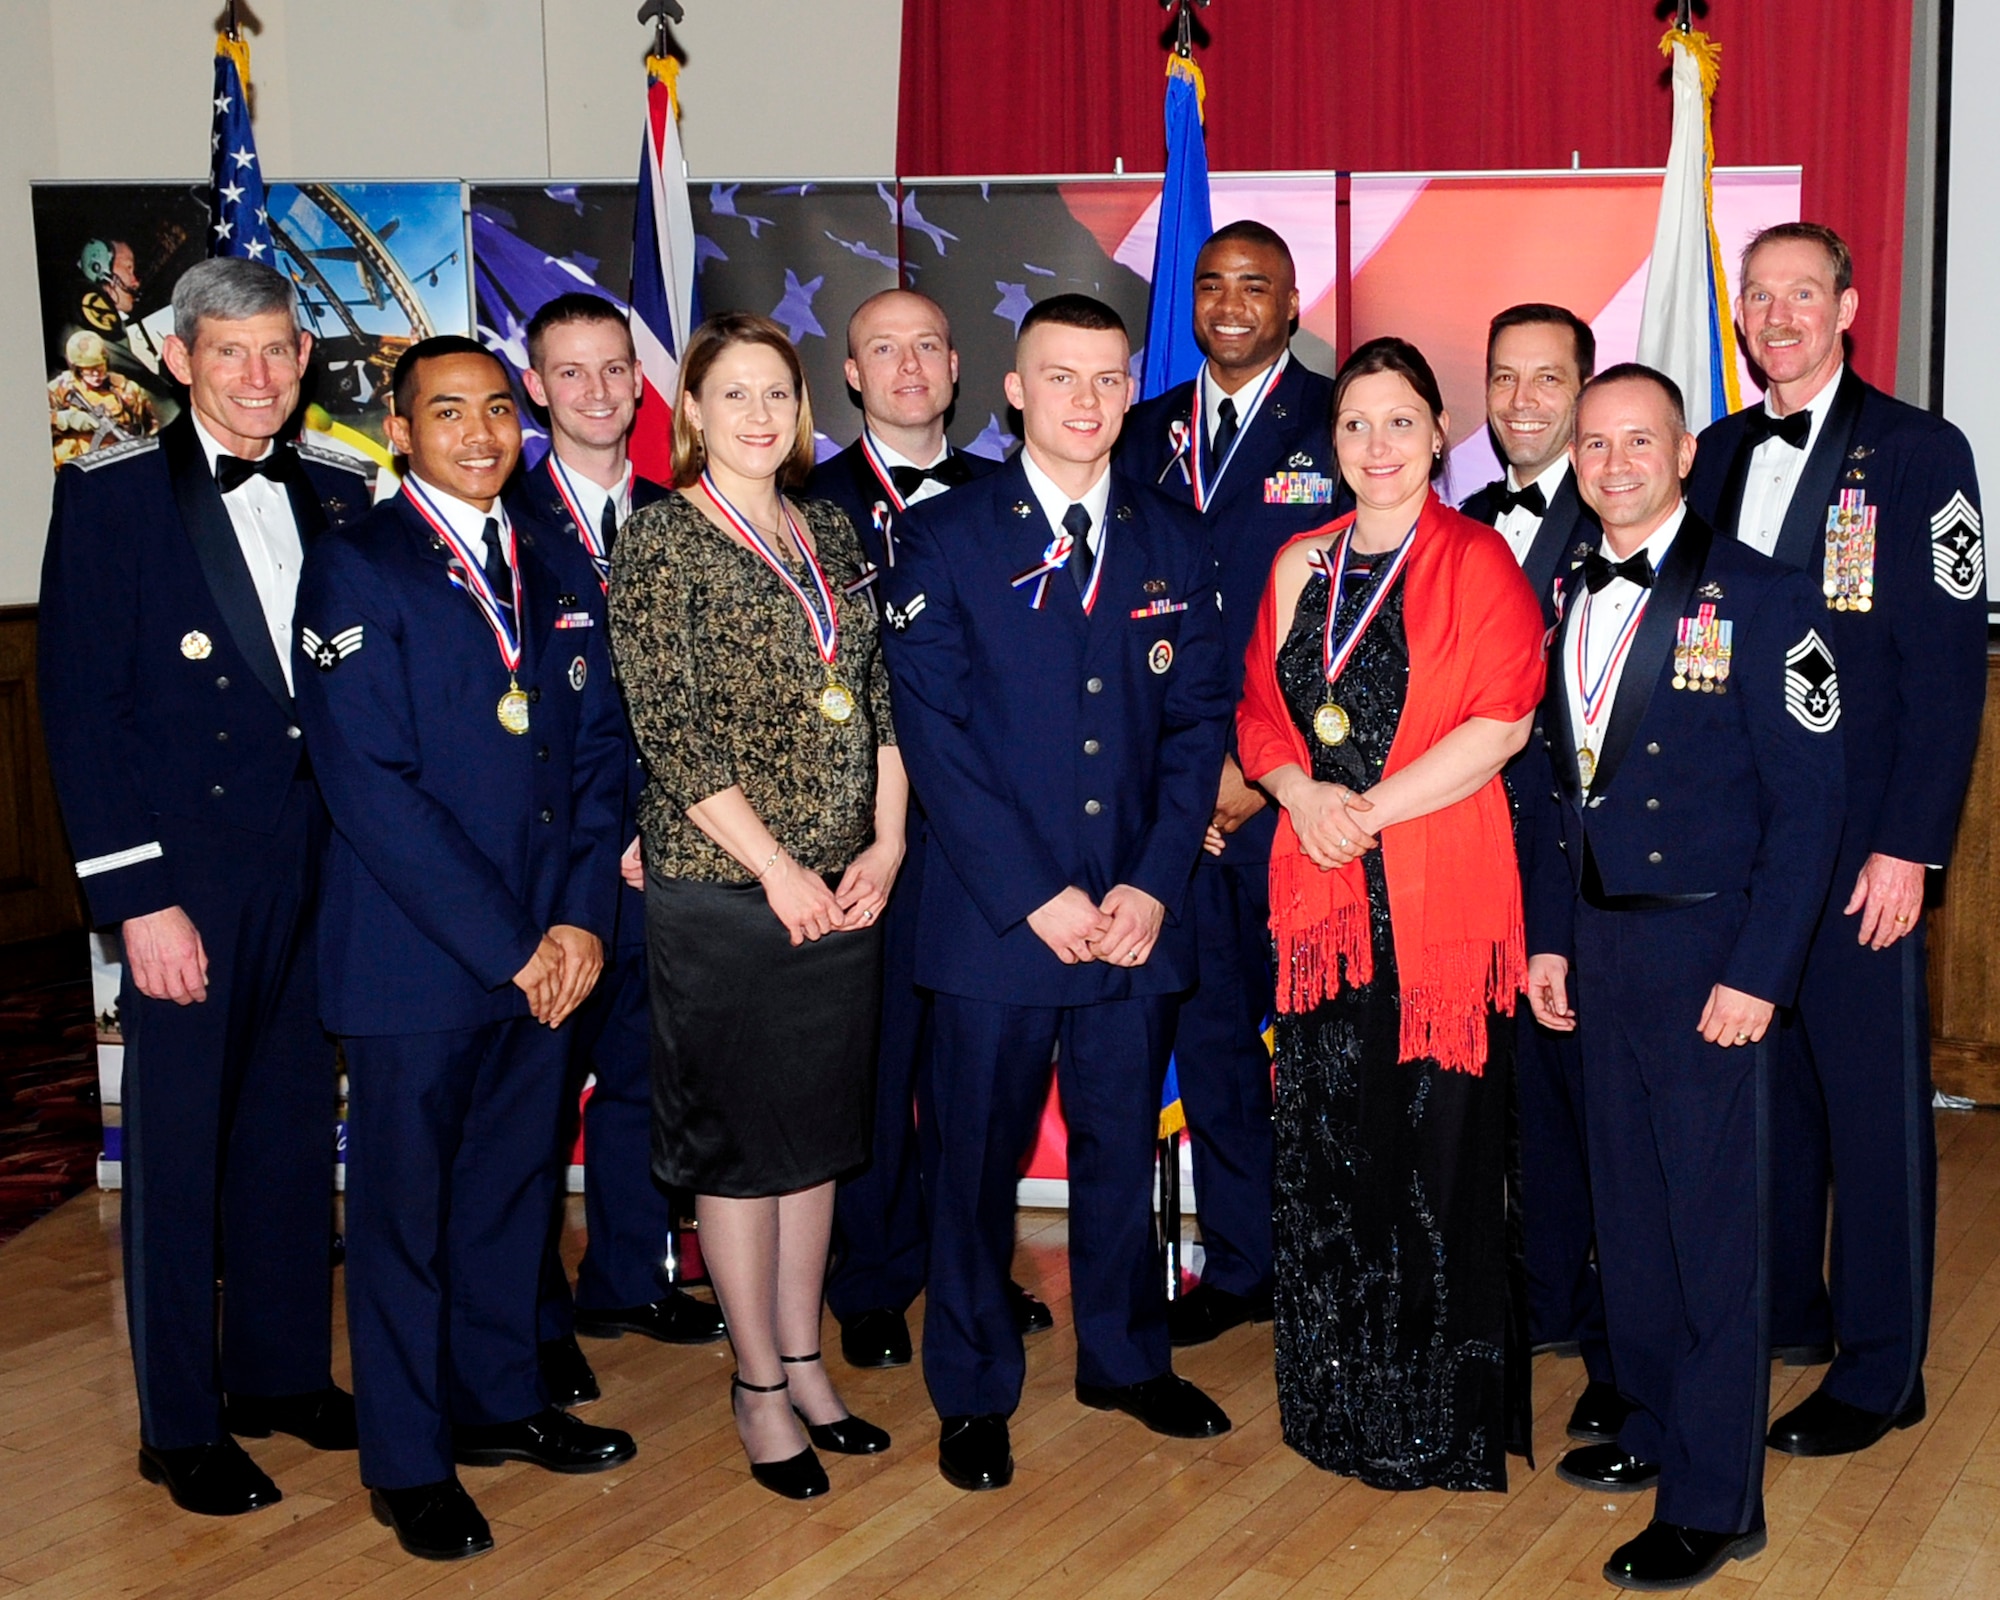 RAF MILDENHALL, England - Air Force Chief of Staff Gen. Norton Schwartz poses for a group photo with the 2011 Team Mildenhall annual award winners during the Annual Awards Banquet here Feb. 10, 2012. Also in the photo are Col. Christopher Kulas, 100th Air Refueling Wing commander, and Chief Master Sgt. Chris Powell, 100th ARW command chief. The winners were Airman 1st Class Orson Lyttle, Senior Airmen Leroy Jackson and Patrick Flynn; Staff Sgt. Byron Washington, Master Sgt. Thomas Wagner, Senior Master Sgt. Emilio
Hernandez, Capt. Nathaniel Smith, Mia Tobitt and Danielle Poyant. (U.S. Air Force photo/Senior Airman Ethan Morgan)
